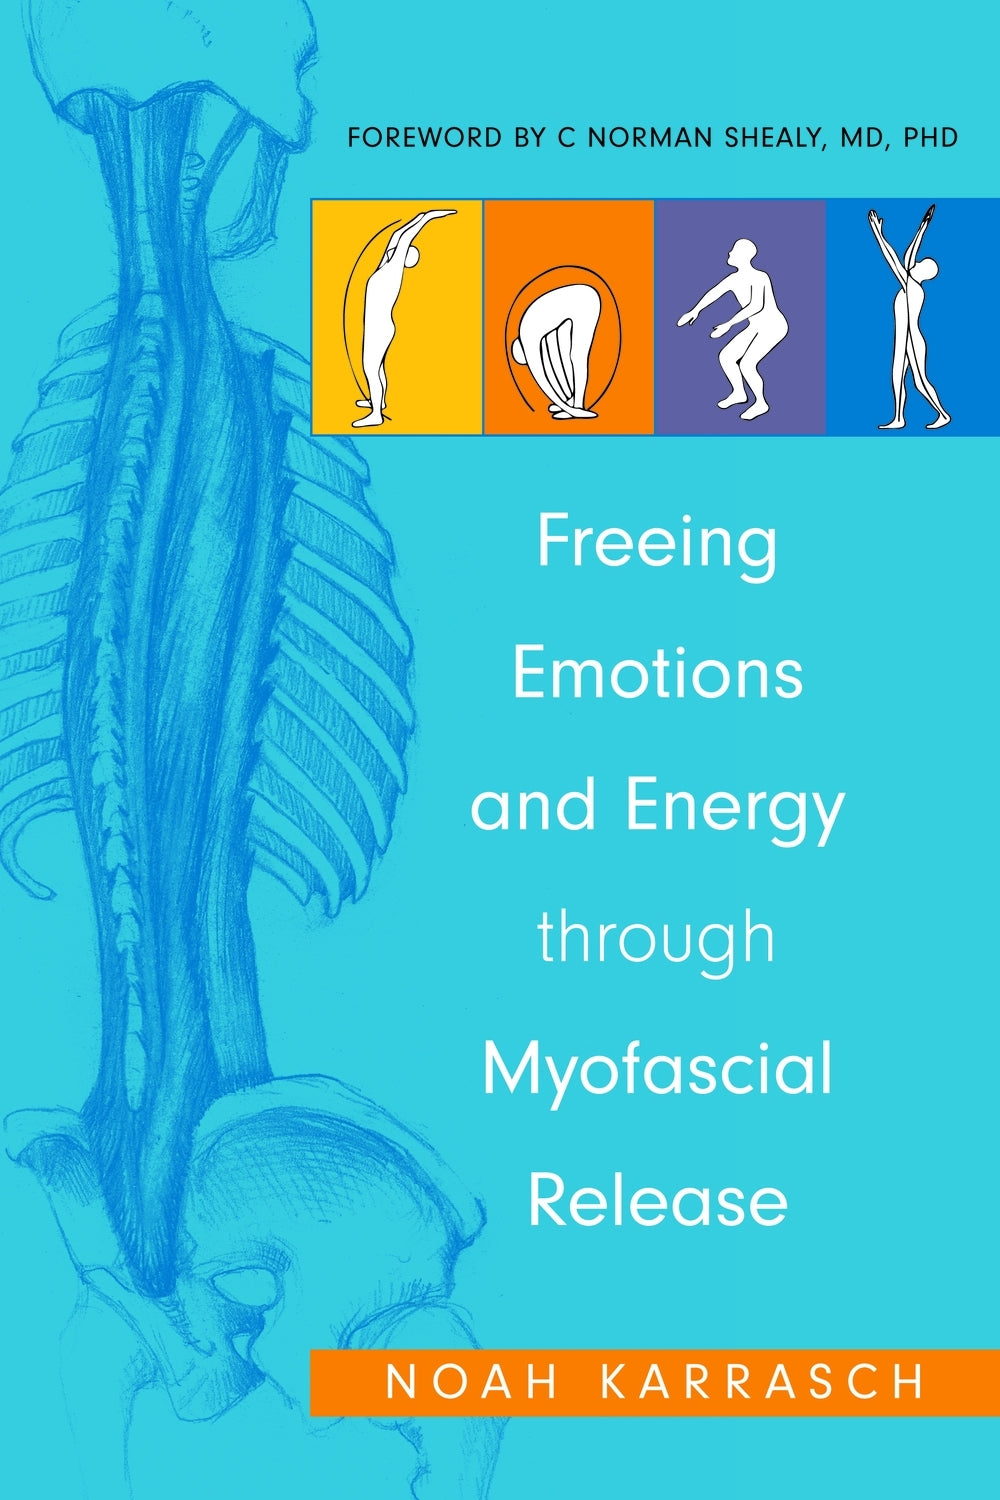 Freeing Emotions and Energy Through Myofascial Release by Julie Zaslow, Amy Rizza, Noah Karrasch, C. Norman Shealy